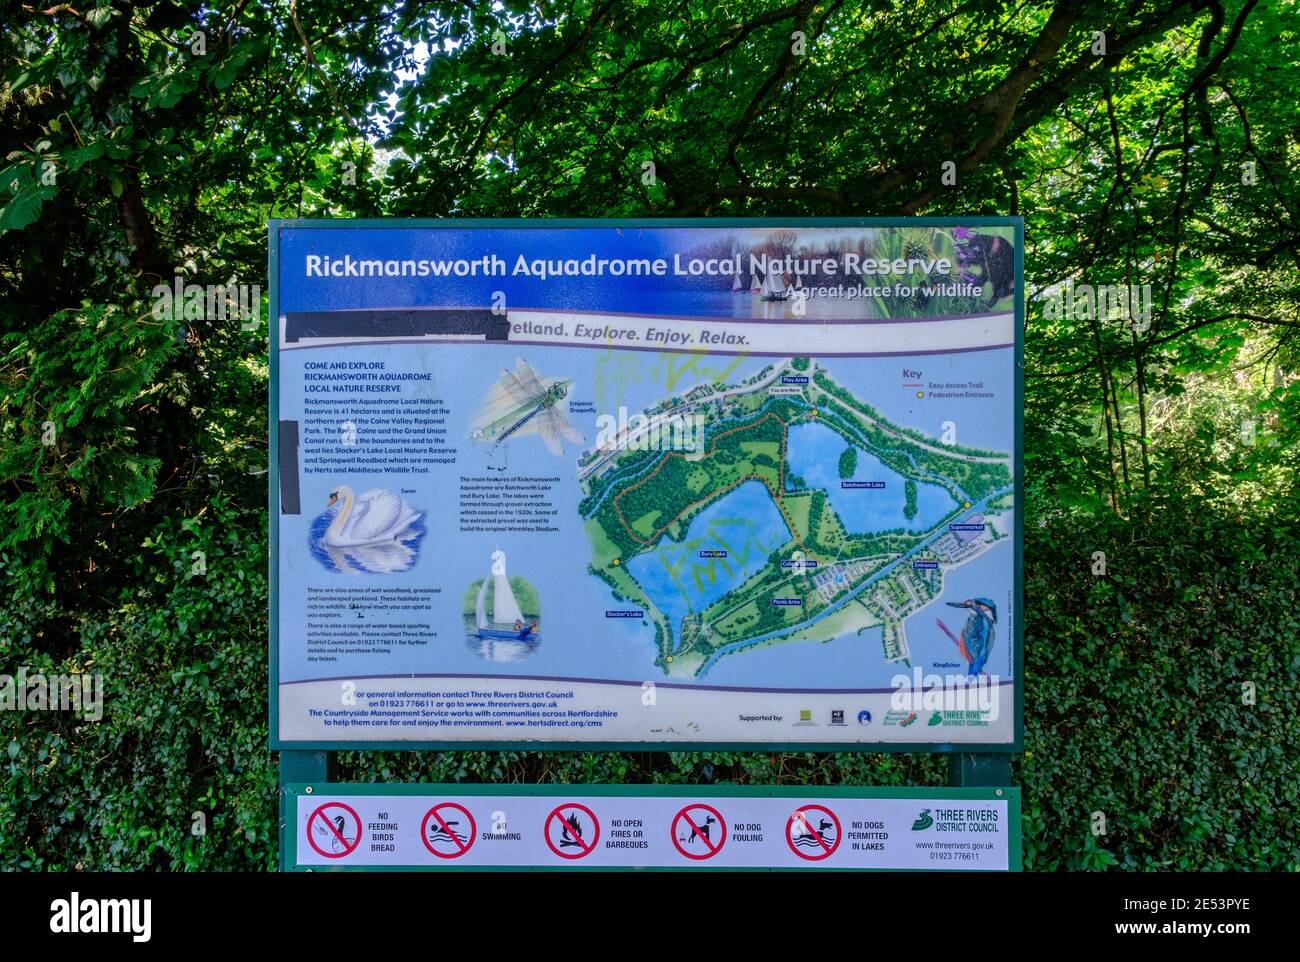 Public information board, with details of Rickmansworth Aquadrome, local nature reserve, mixed woodland & lakes. Hertfordshire, England. Stock Photo